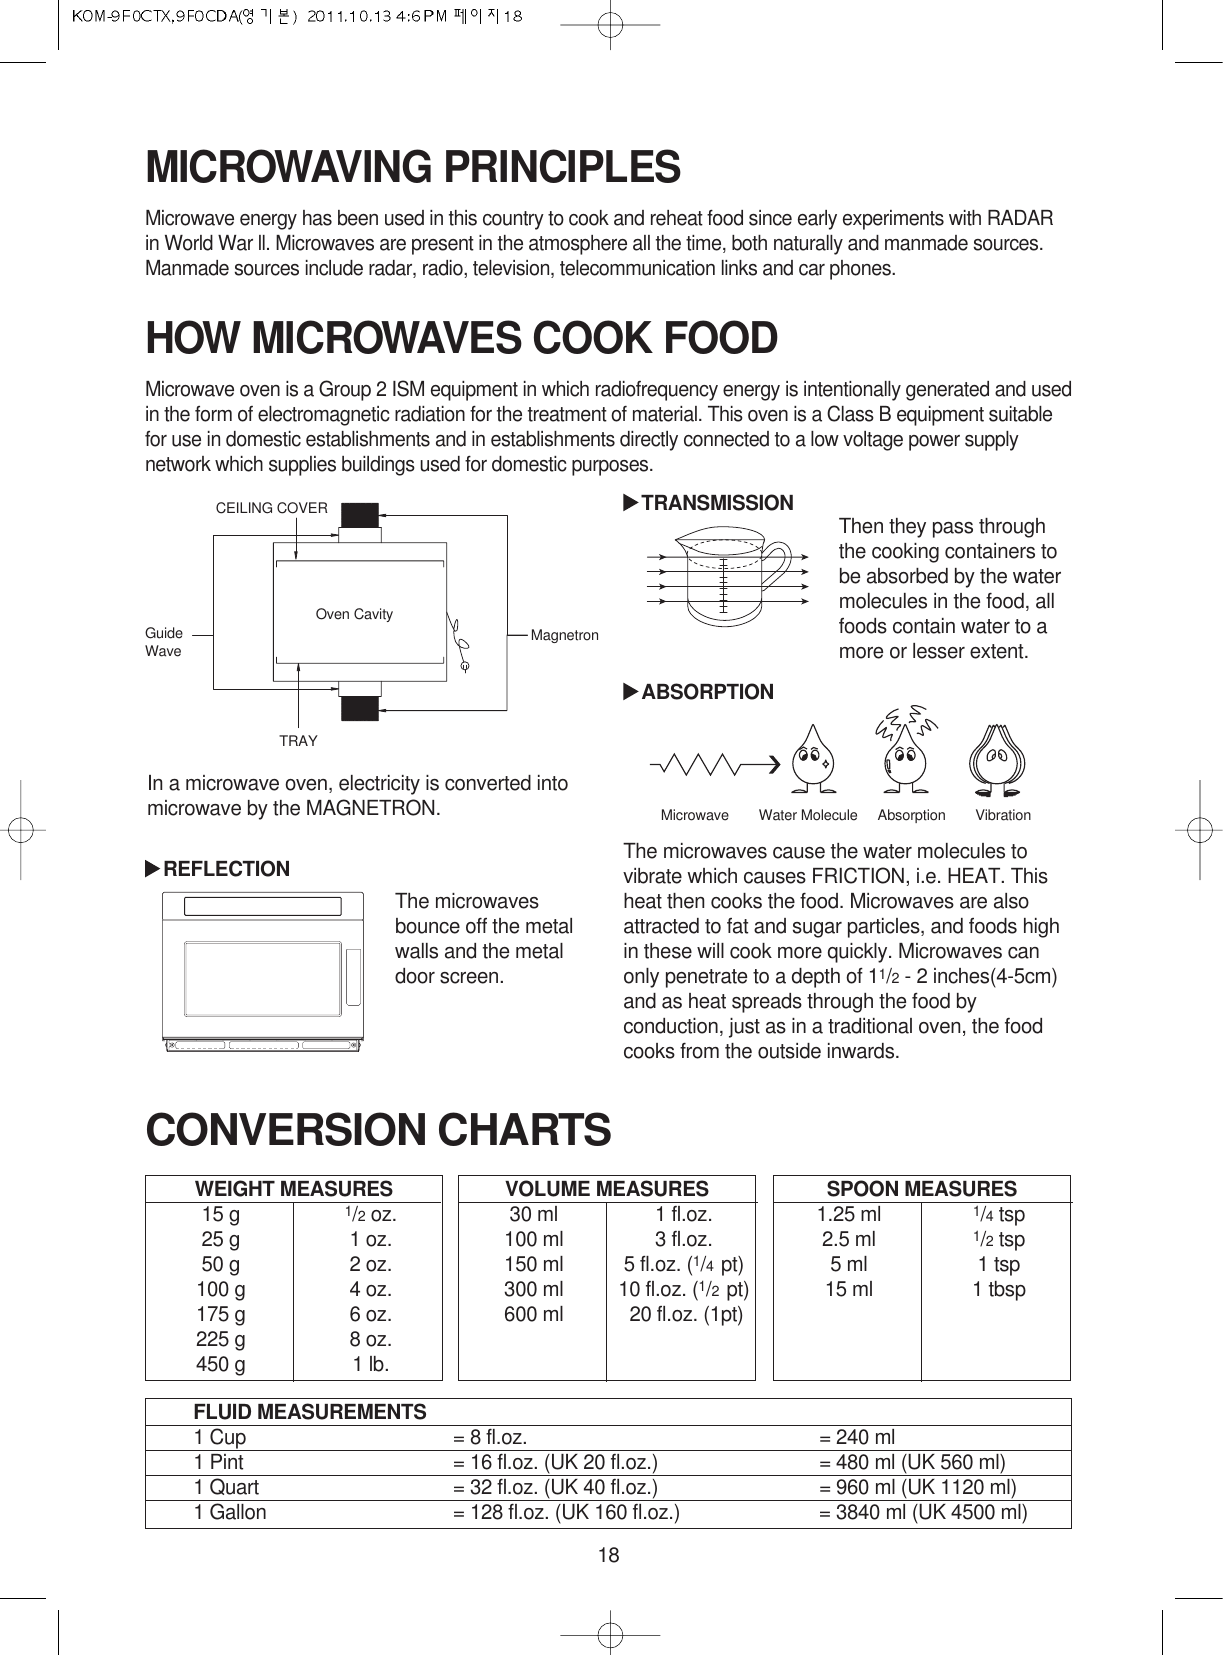 18MICROWAVING PRINCIPLESMicrowave energy has been used in this country to cook and reheat food since early experiments with RADARin World War ll. Microwaves are present in the atmosphere all the time, both naturally and manmade sources.Manmade sources include radar, radio, television, telecommunication links and car phones.CONVERSION CHARTSWEIGHT MEASURES15 g 1/2oz.25 g 1 oz.50 g 2 oz.100 g 4 oz.175 g 6 oz.225 g 8 oz.450 g 1 lb.HOW MICROWAVES COOK FOODMicrowave oven is a Group 2 ISM equipment in which radiofrequency energy is intentionally generated and usedin the form of electromagnetic radiation for the treatment of material. This oven is a Class B equipment suitablefor use in domestic establishments and in establishments directly connected to a low voltage power supplynetwork which supplies buildings used for domestic purposes.VOLUME MEASURES30 ml 1 fl.oz.100 ml 3 fl.oz.150 ml 5 fl.oz. (1/4  pt)300 ml 10 fl.oz. (1/2  pt)600 ml 20 fl.oz. (1pt)SPOON MEASURES1.25 ml 1/4tsp2.5 ml 1/2tsp5 ml 1 tsp15 ml 1 tbspFLUID MEASUREMENTS1 Cup = 8 fl.oz. = 240 ml1 Pint = 16 fl.oz. (UK 20 fl.oz.) = 480 ml (UK 560 ml)1 Quart = 32 fl.oz. (UK 40 fl.oz.) = 960 ml (UK 1120 ml)1 Gallon = 128 fl.oz. (UK 160 fl.oz.) = 3840 ml (UK 4500 ml)Then they pass throughthe cooking containers tobe absorbed by the watermolecules in the food, allfoods contain water to amore or lesser extent.The microwaves cause the water molecules tovibrate which causes FRICTION, i.e. HEAT. Thisheat then cooks the food. Microwaves are alsoattracted to fat and sugar particles, and foods highin these will cook more quickly. Microwaves canonly penetrate to a depth of 11/2- 2 inches(4-5cm)and as heat spreads through the food byconduction, just as in a traditional oven, the foodcooks from the outside inwards.In a microwave oven, electricity is converted intomicrowave by the MAGNETRON.The microwavesbounce off the metalwalls and the metaldoor screen.REFLECTIONTRANSMISSIONABSORPTIONMicrowave Water Molecule Absorption VibrationCEILING COVEROven CavityGuideWaveTRAYMagnetron